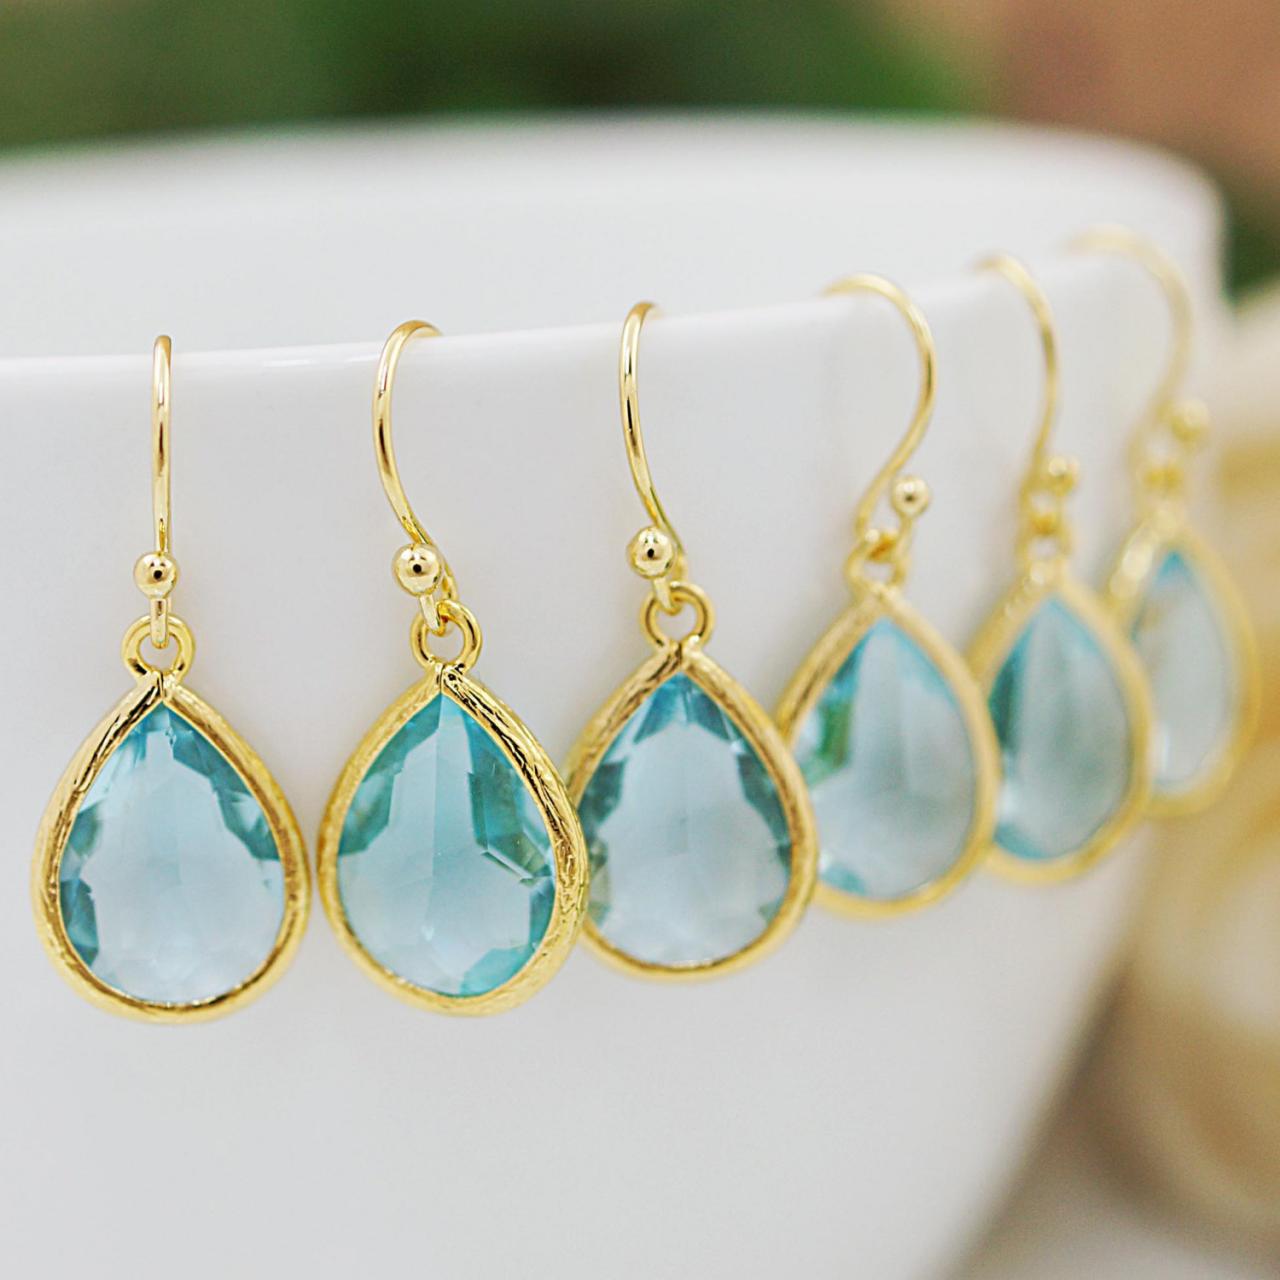 Bridesmaid gifts Bridesmaid Earrings Wedding gift Aquamarine Glass drops dangle earrings Everyday gift for her Christmas gift under 20